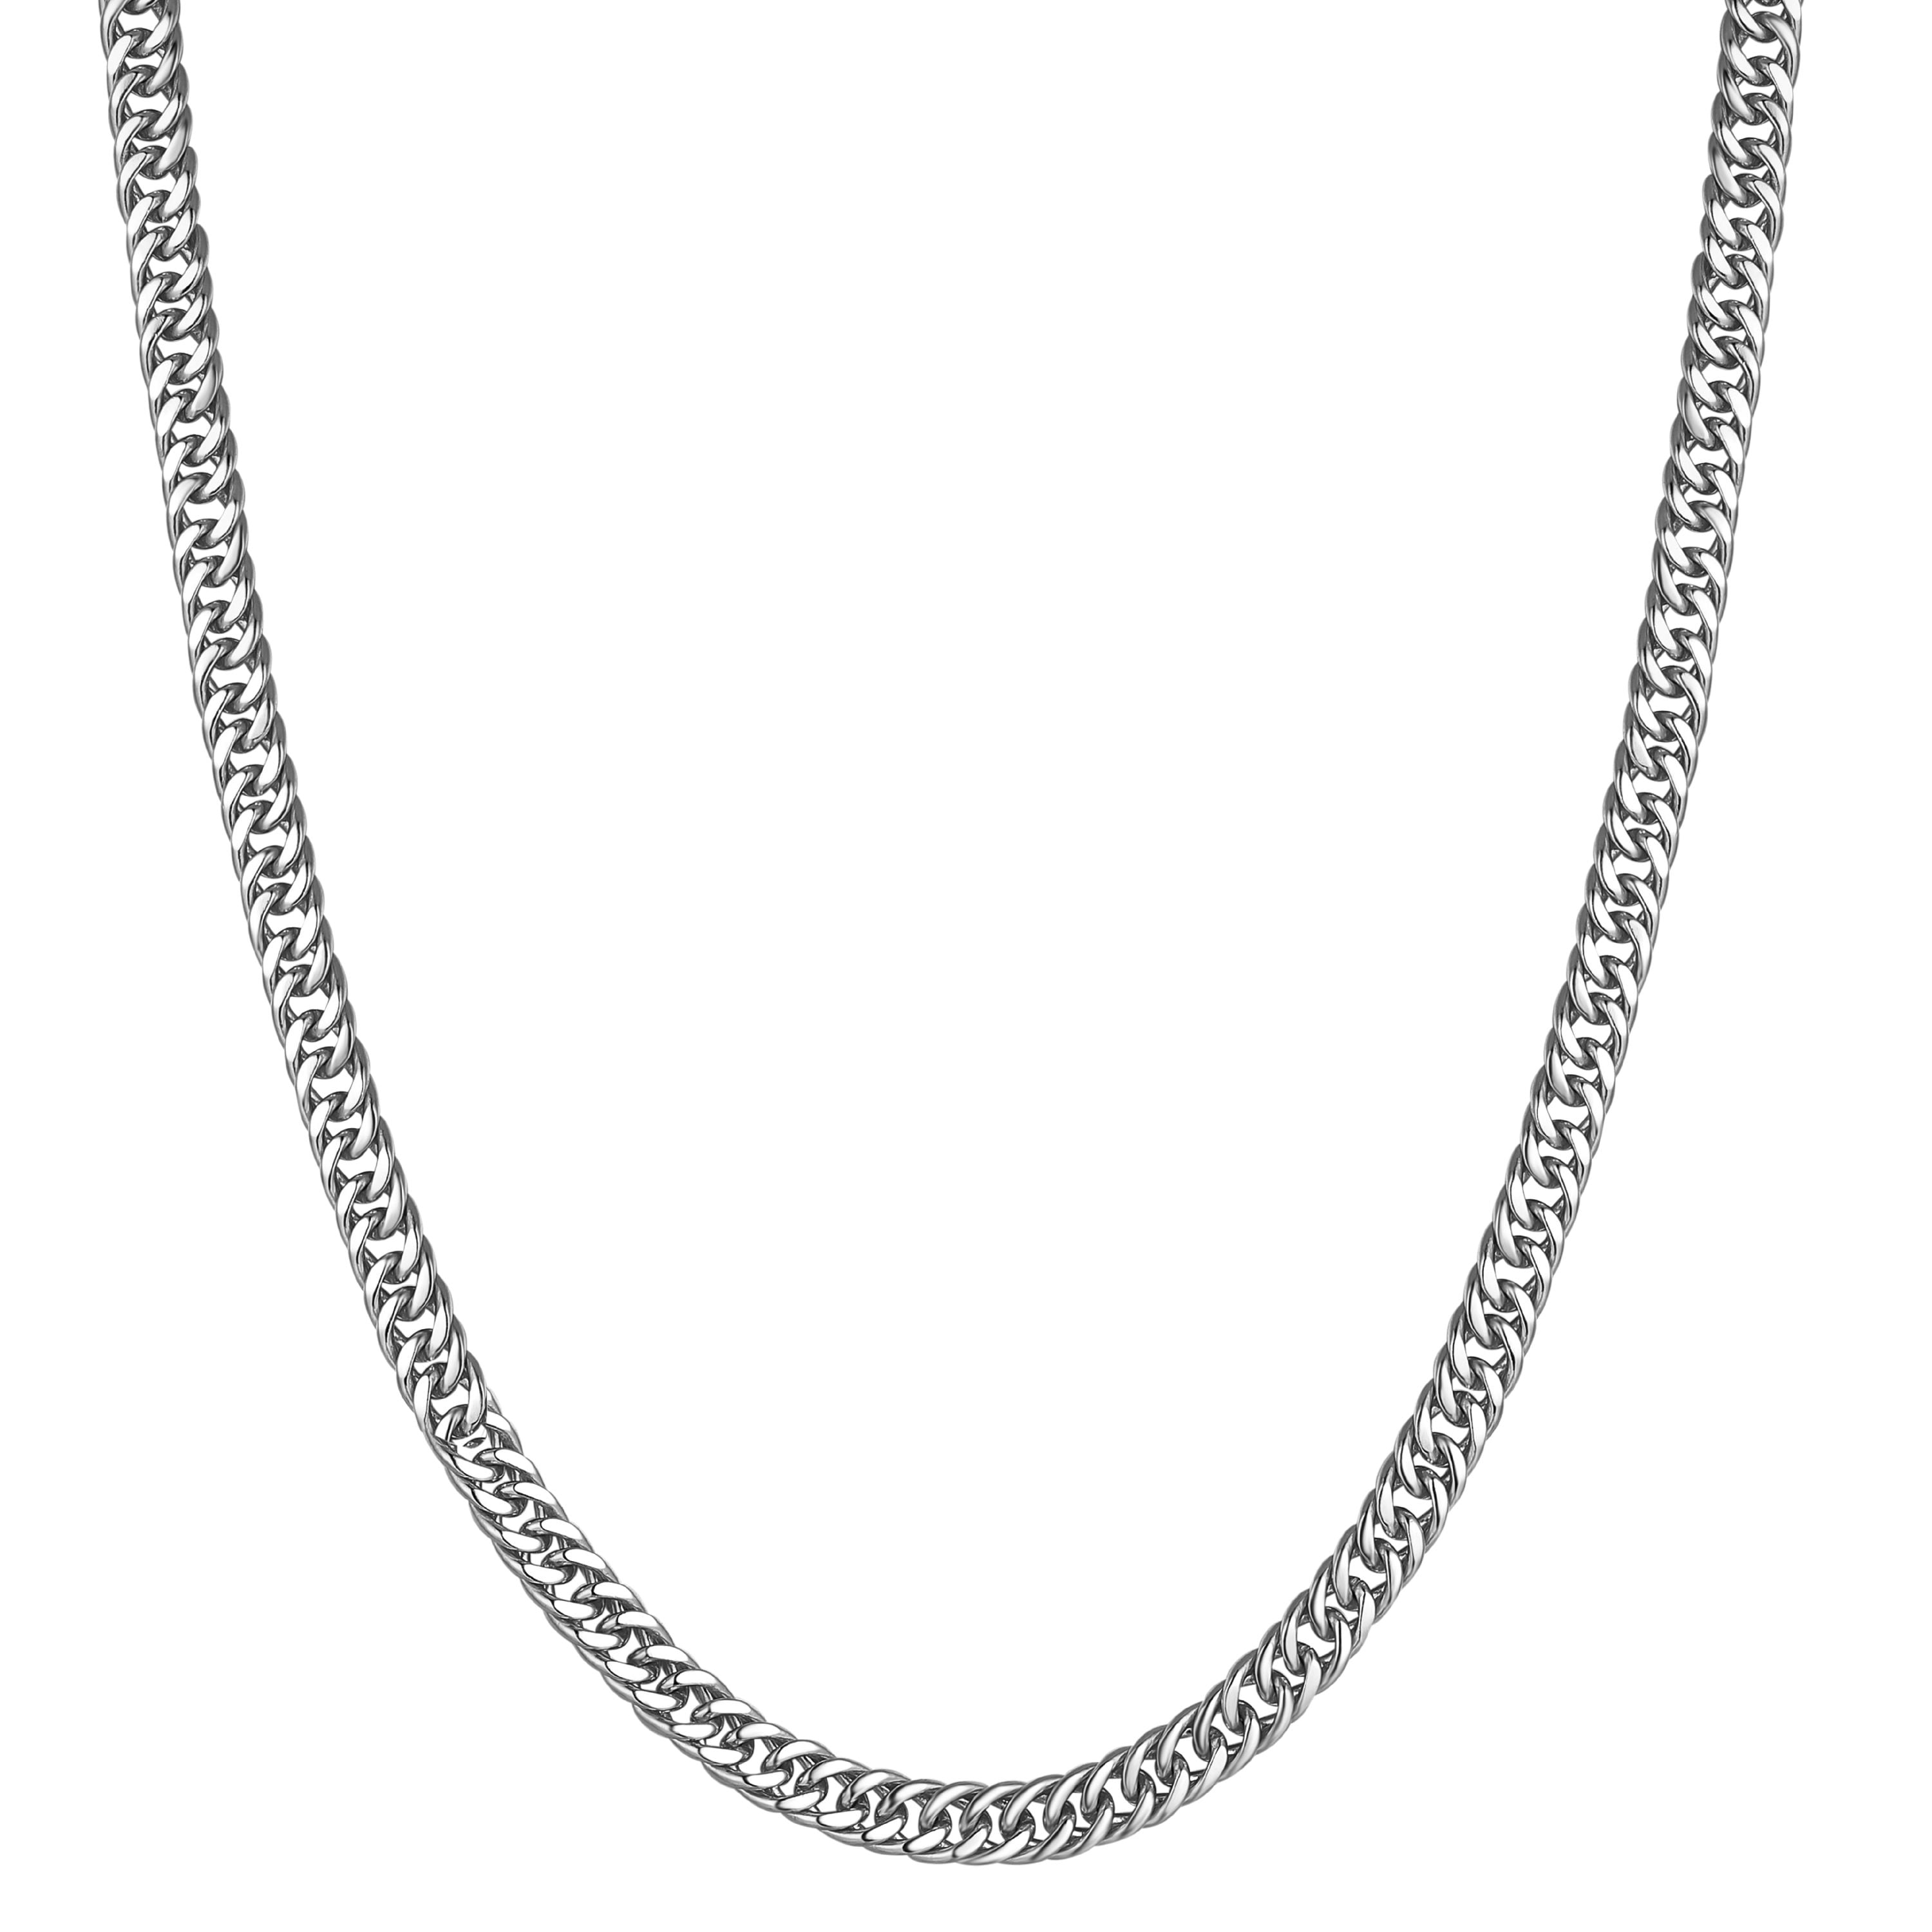 Daesar Men Necklace Chain Stainless Steel Double Curb Chain Silver